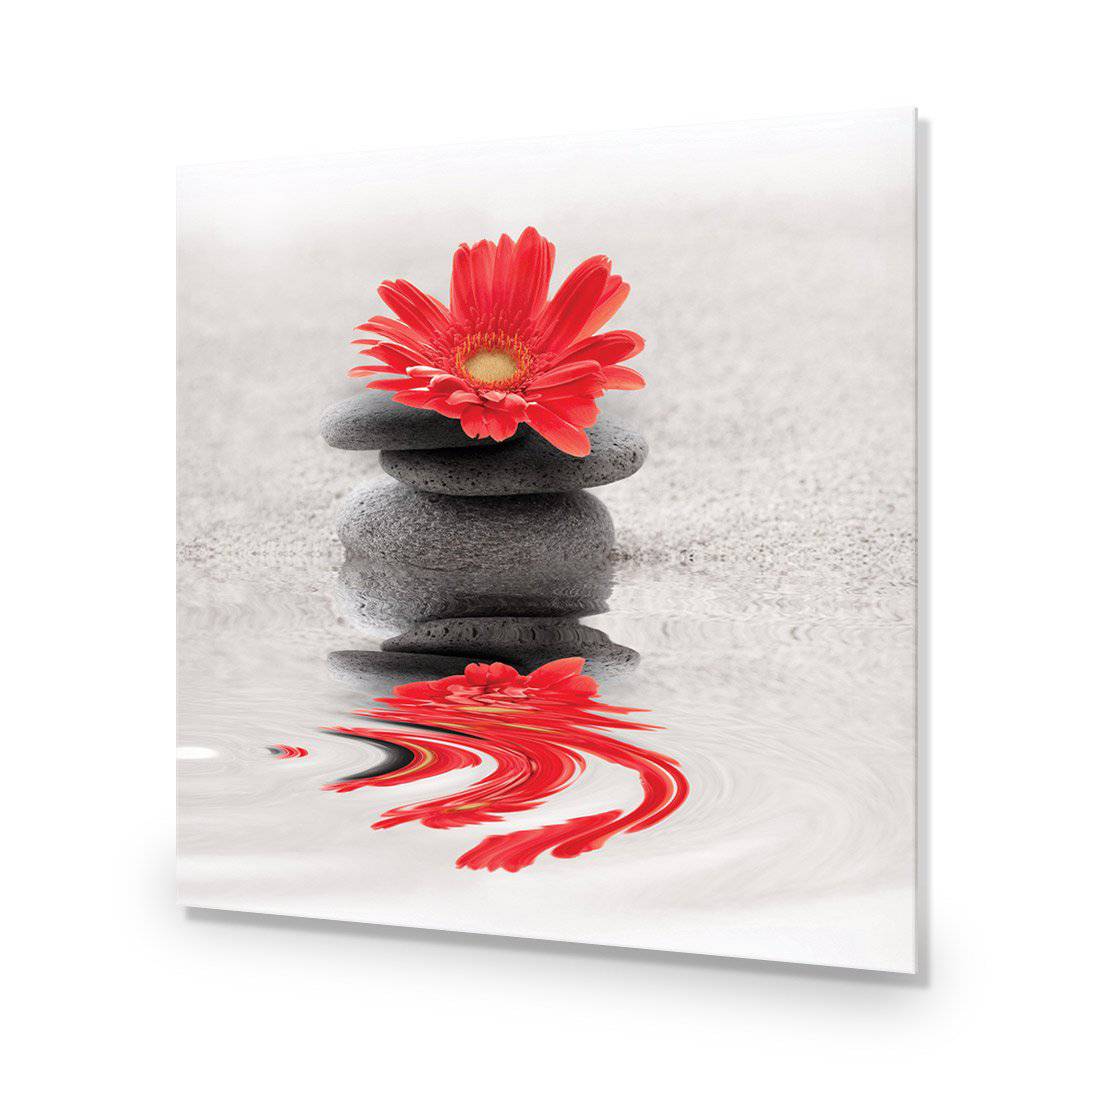 Red Flower Reflection, Square-Acrylic-Wall Art Design-Without Border-Acrylic - No Frame-37x37cm-Wall Art Designs